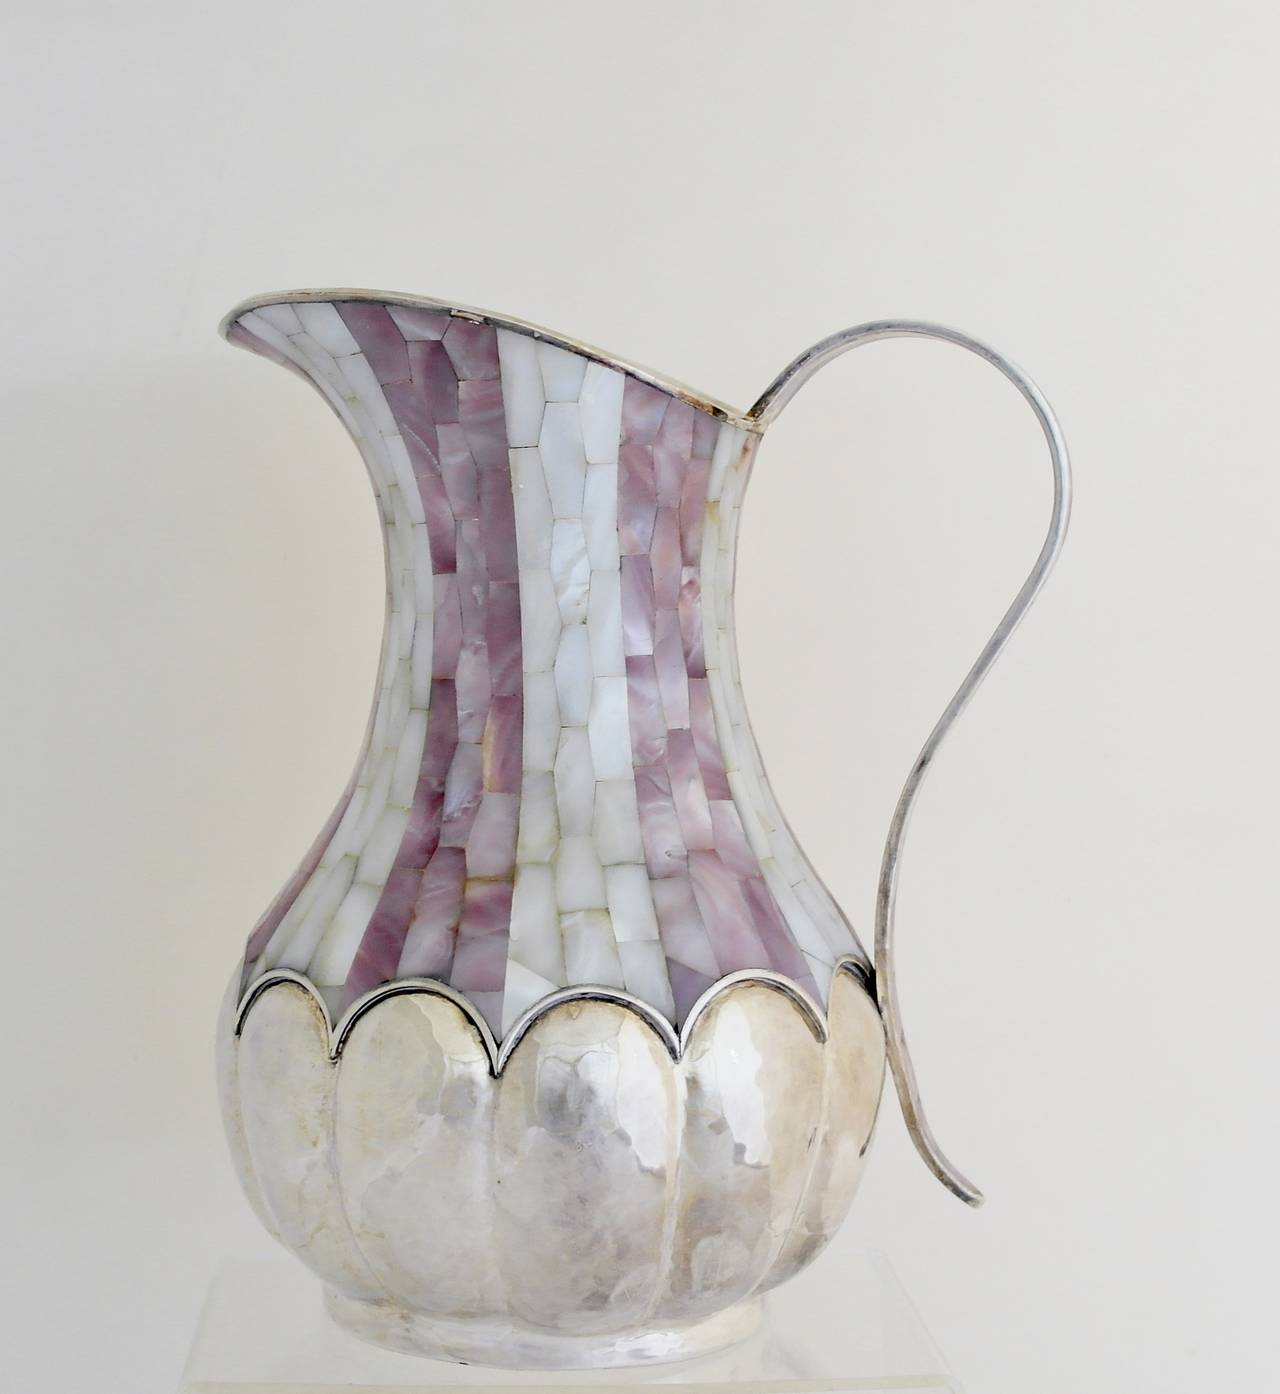 Being offered is a large circa 1990 pitcher by Los Castillo of Taxco, Mexico, bulbous shape with mother of pearl inlay, curved handle, wide spout. Dimensions 10 1/2 inches high. Marked as illustrated. In excellent condition.